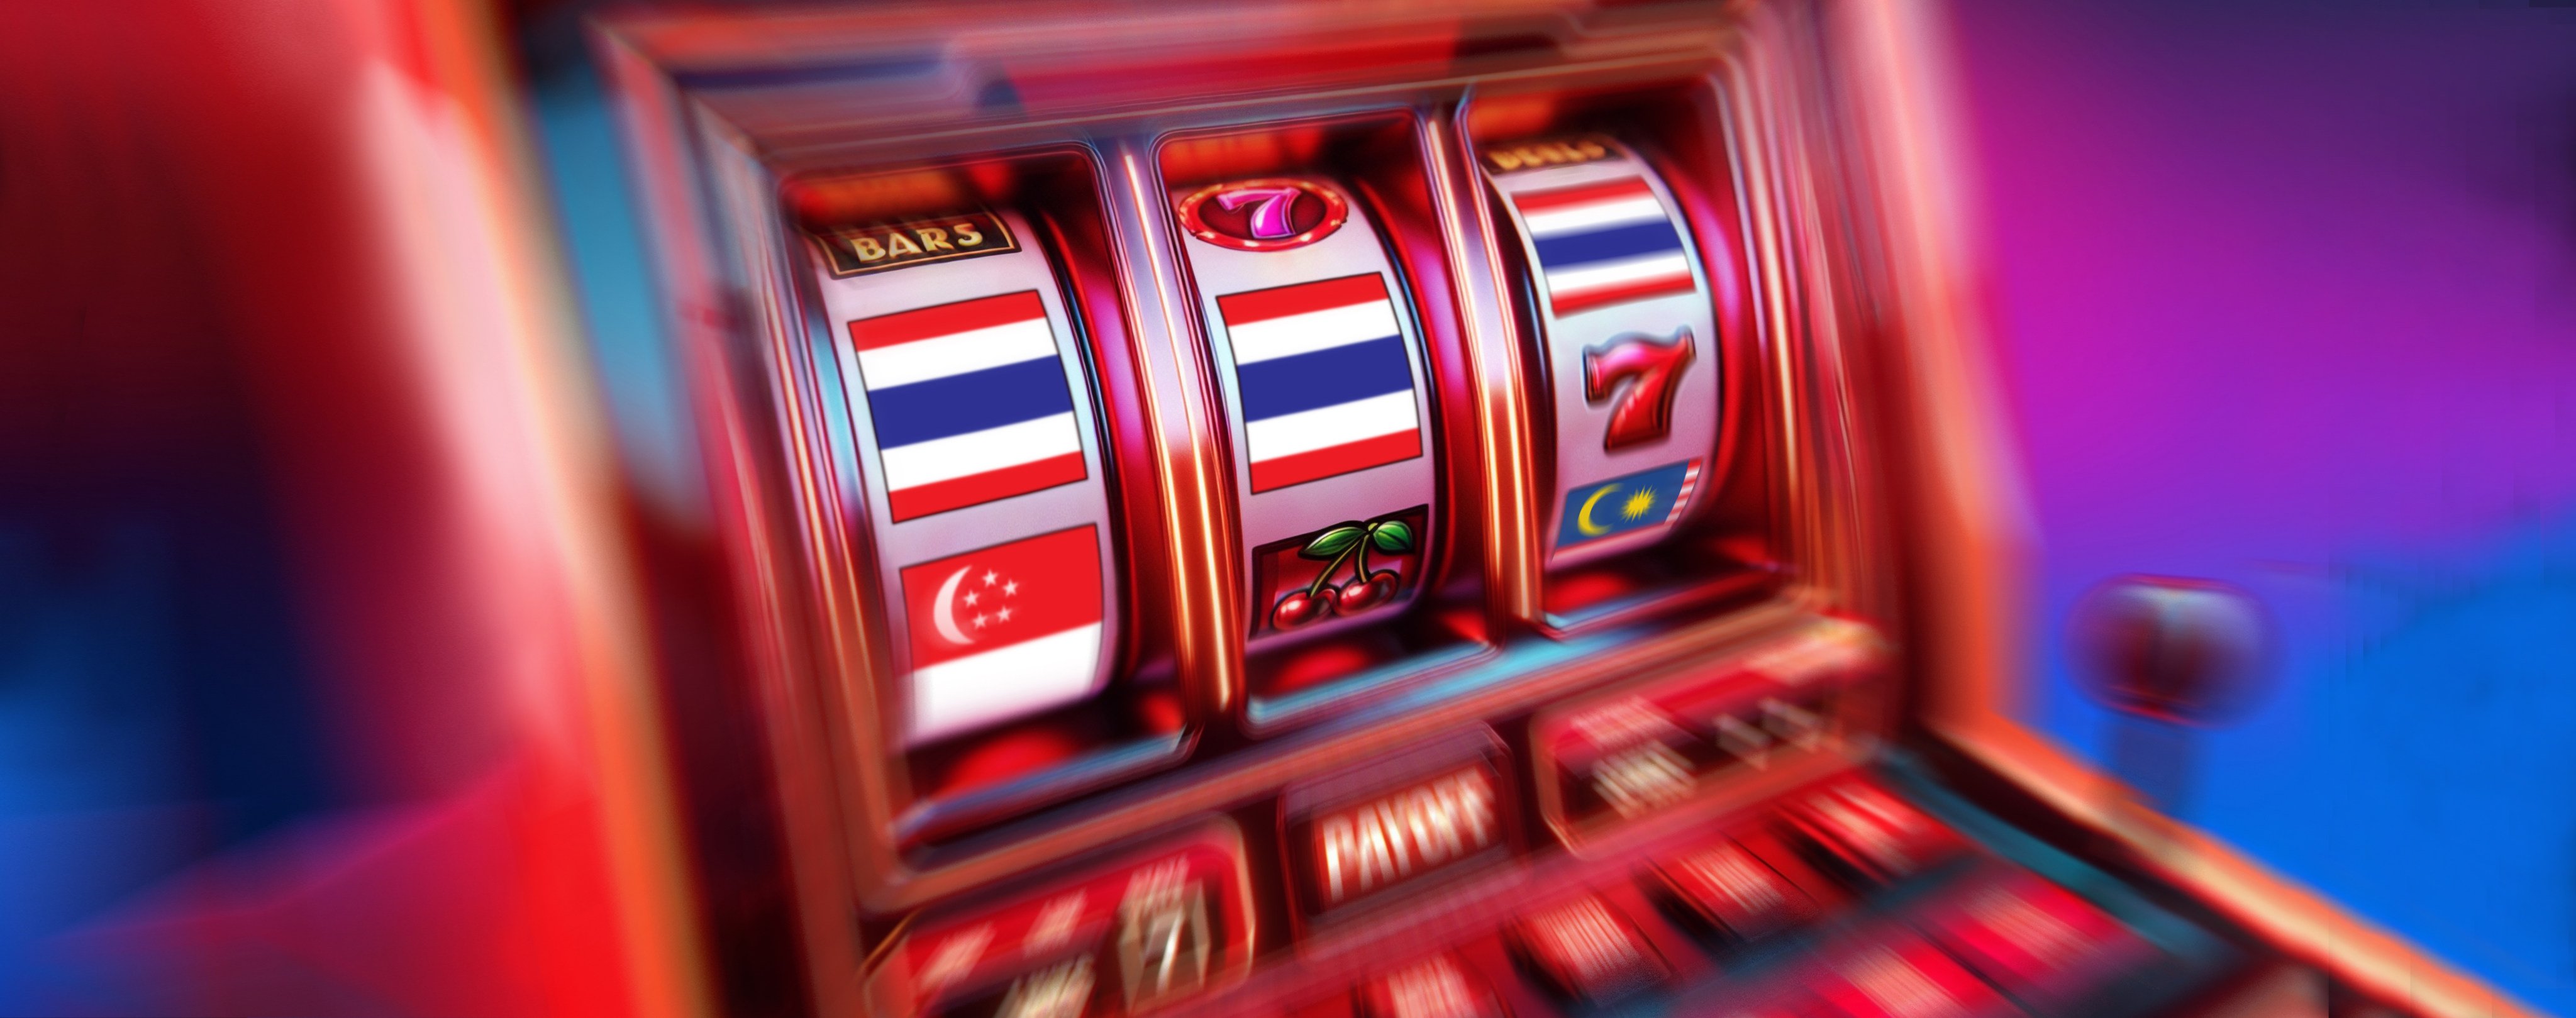 Industry insiders speculate a legalised gaming sector could rake in as much as US$5 billion a year for Thailand by the end of the decade. Image: Shutterstock